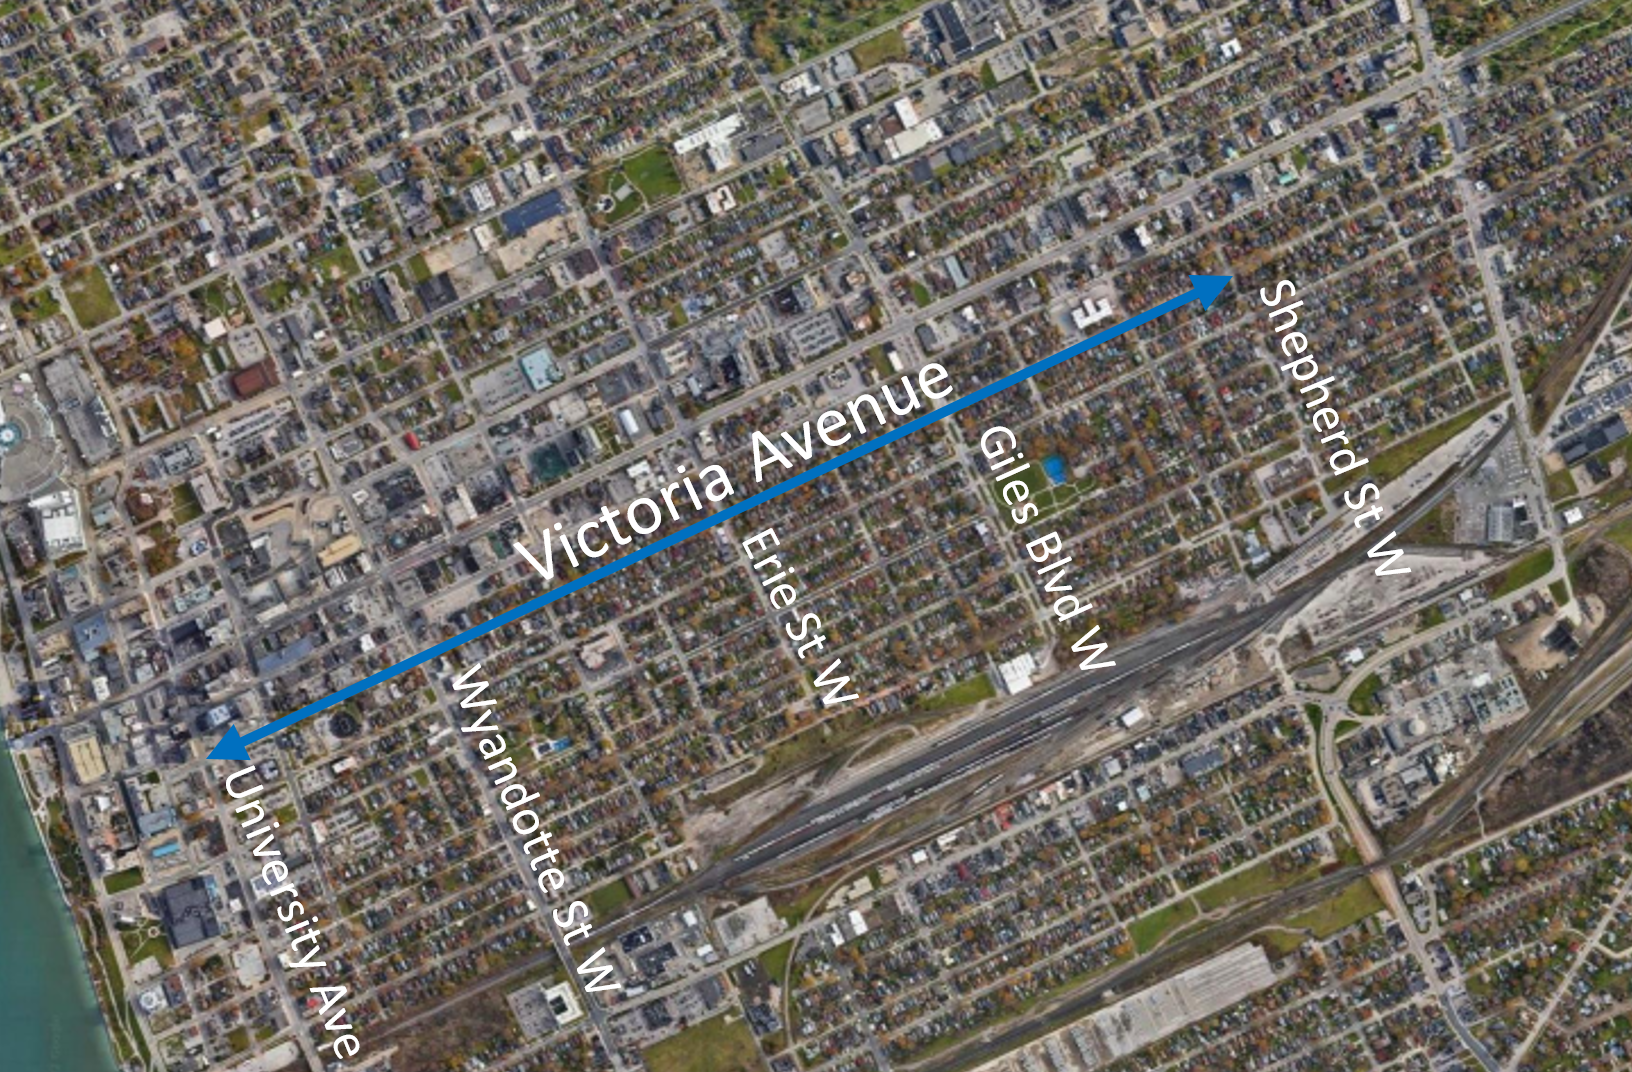 Map of Victoria Avenue from University Avenue to Shepherd Street West